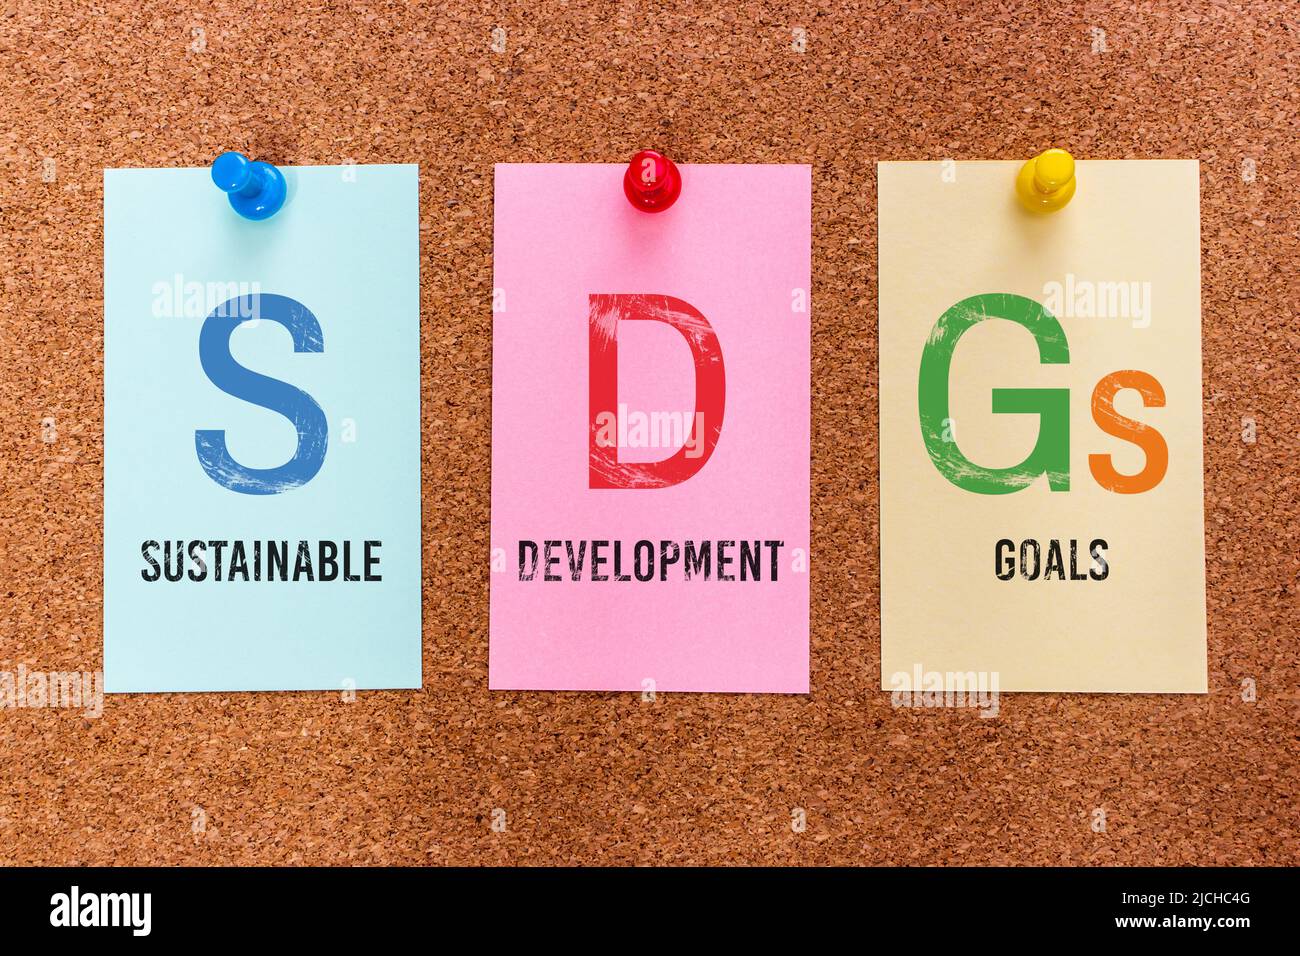 Conceptual 3 letters keyword SDGs (Sustainable Development Goals), on multicolored stickers attached to a cork board. Stock Photo